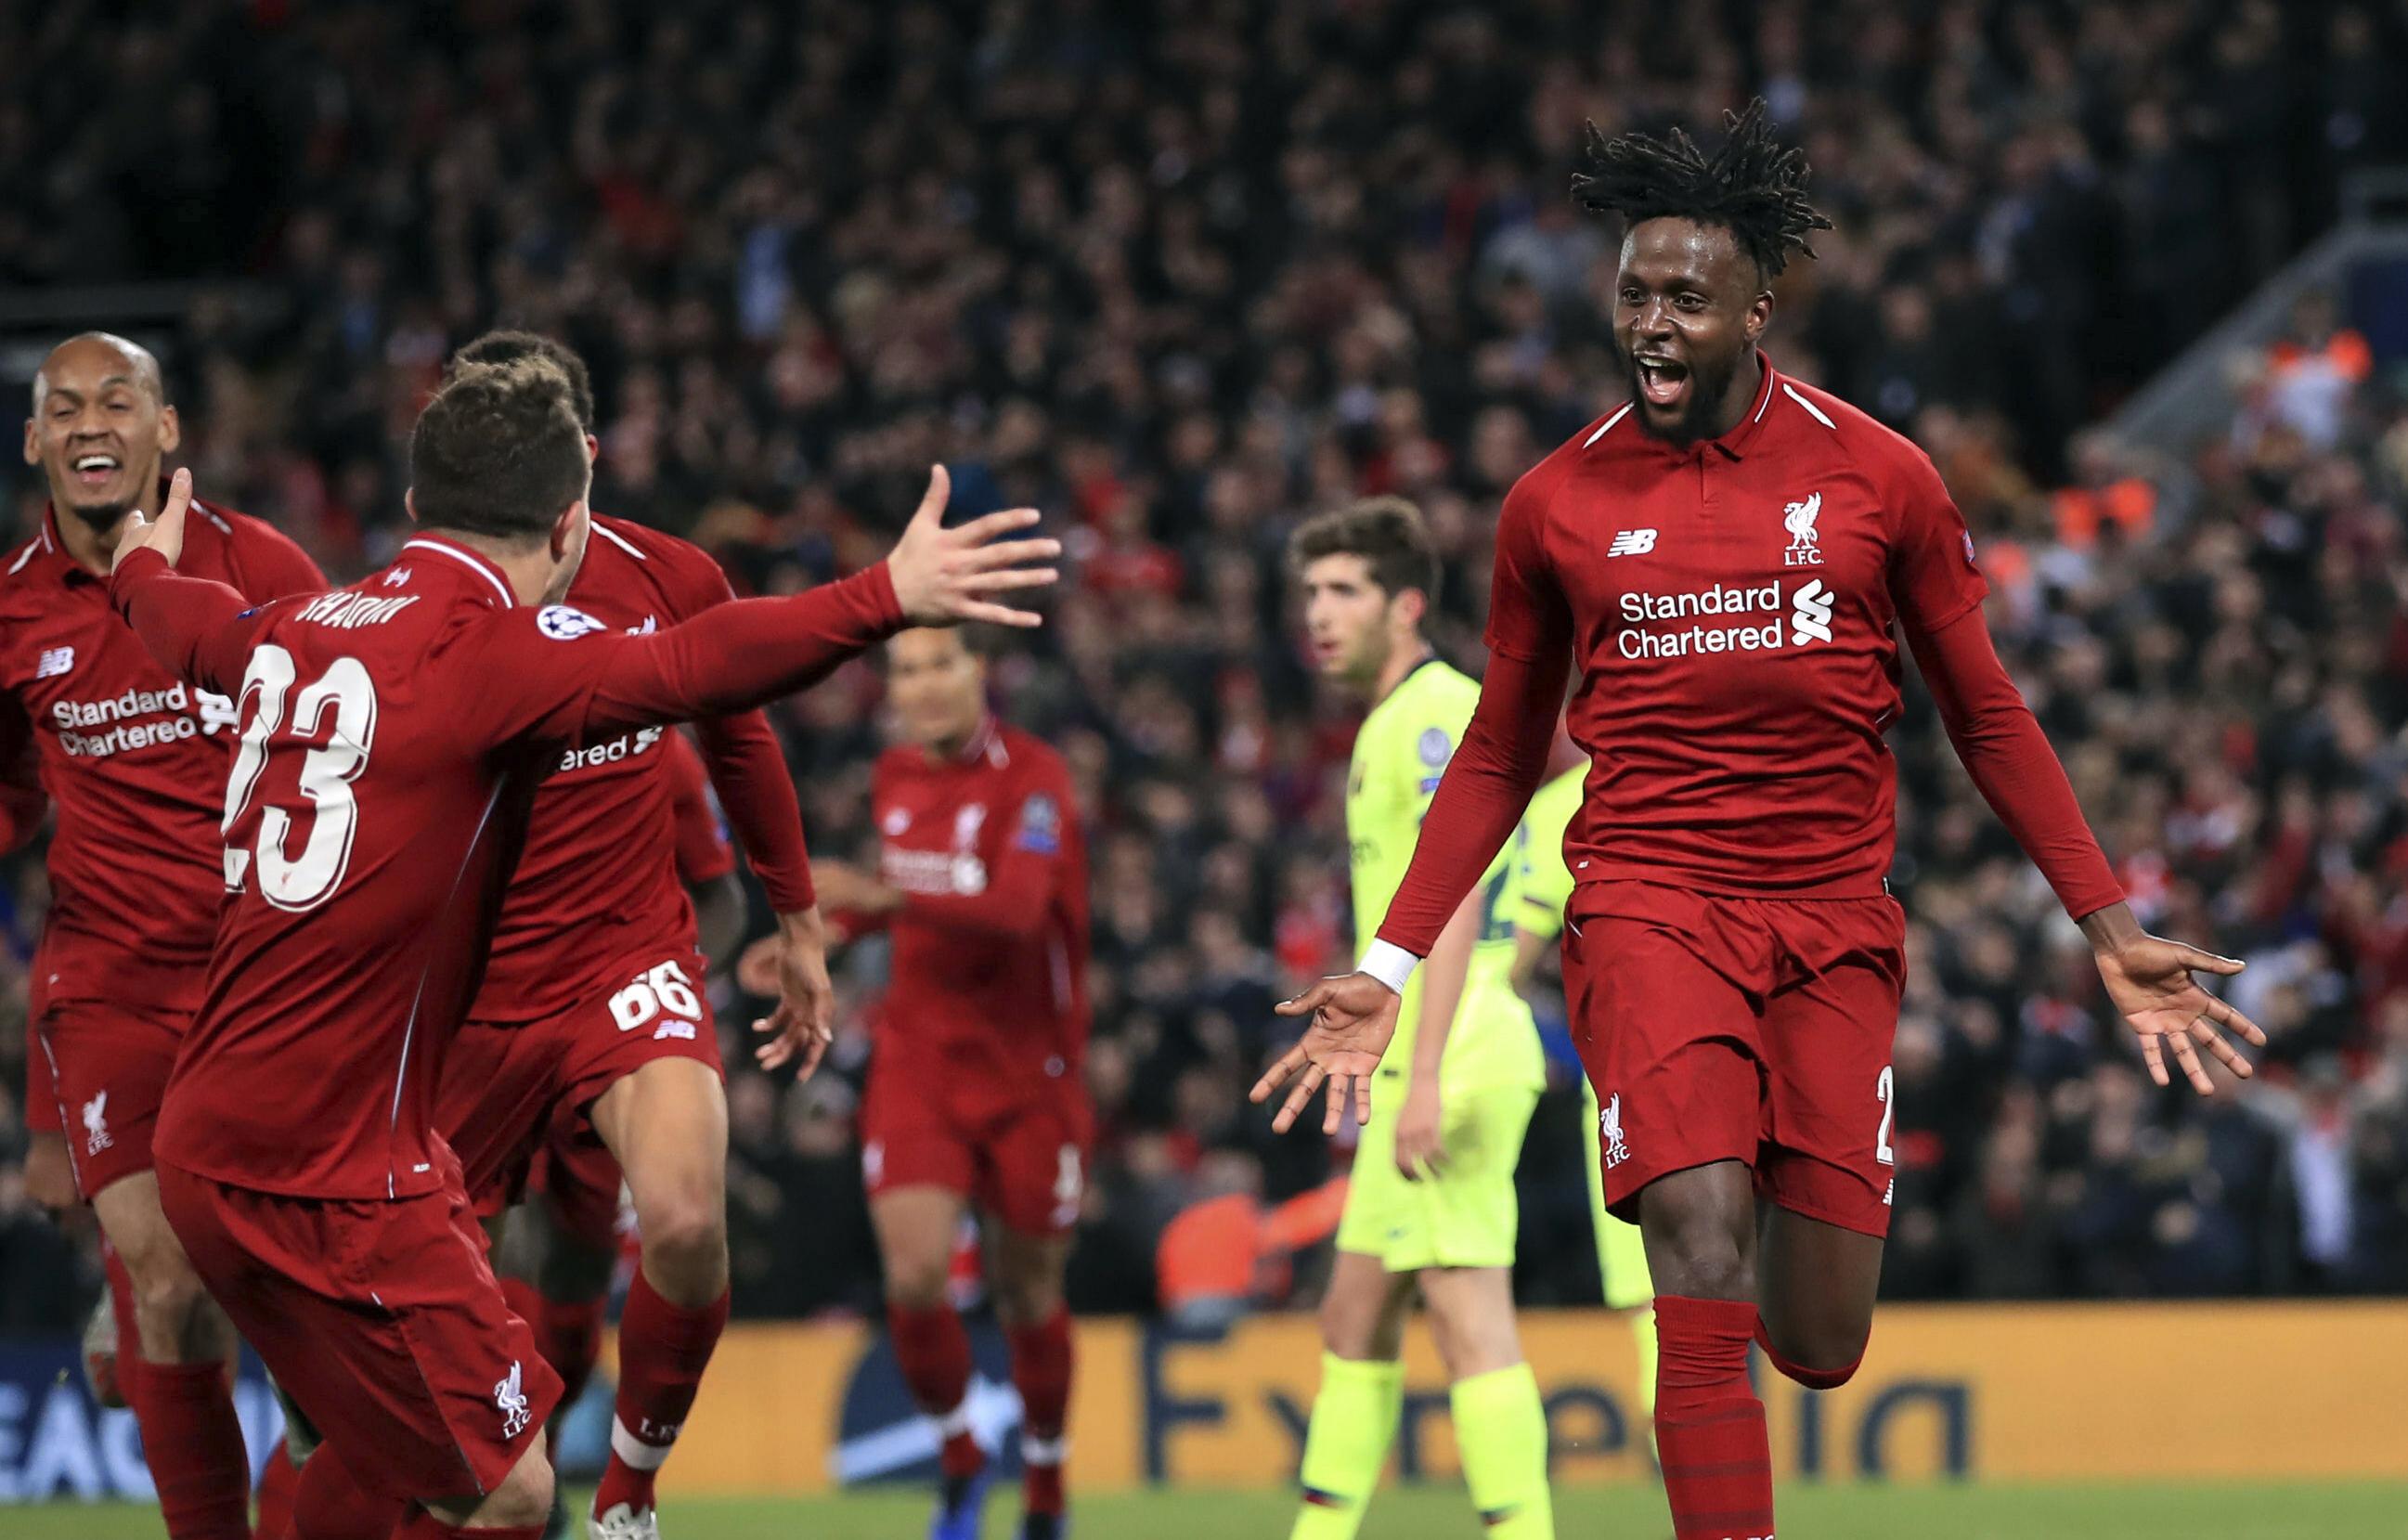 Liverpool ousts Barca in historic UEFA Champions League comeback | The Spokesman-Review